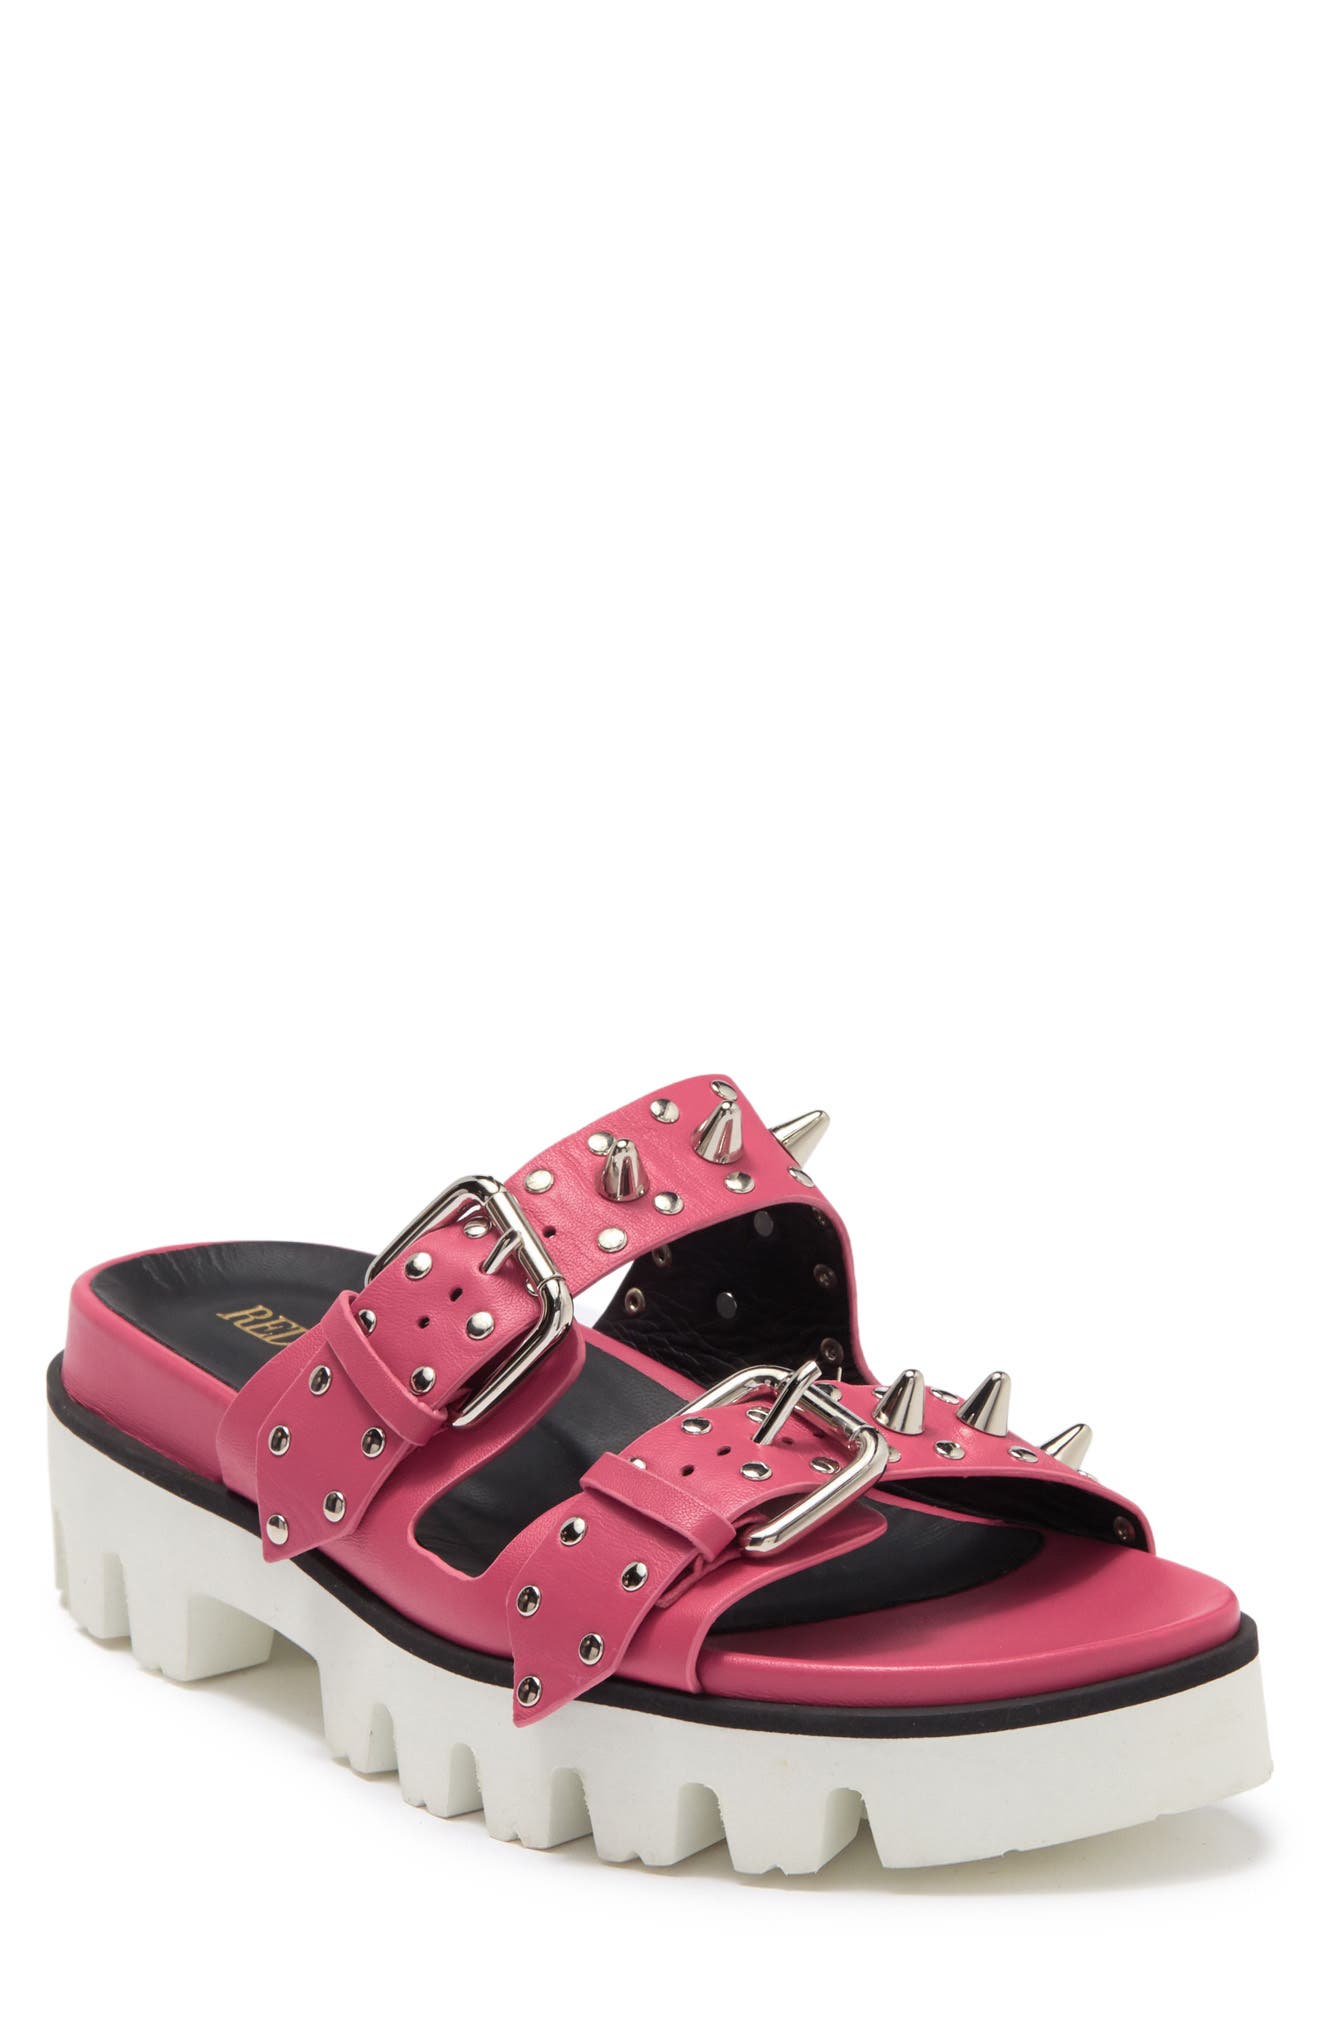 Red Valentino Spike Studded Leather Mule In Geranio